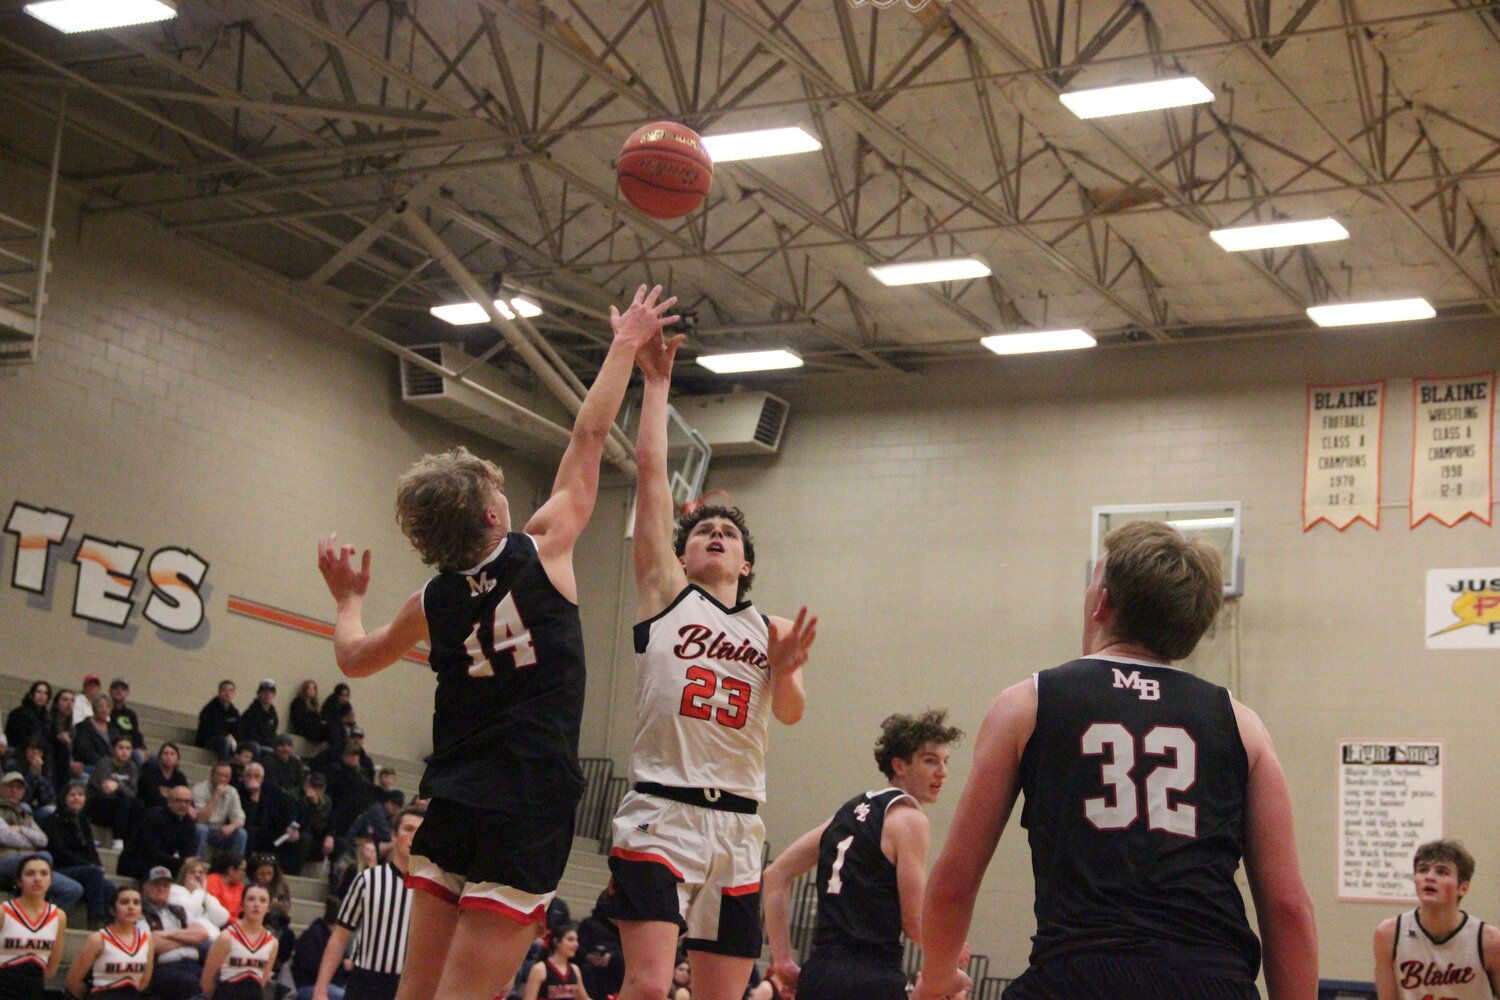 Blaine senior guard Jesse Deming attempts a floater against a pair of Mount Baker defenders. Deming had eight points on the night, all of which came in the third quarter when the Borderites were desperately mounting a comeback attempt.